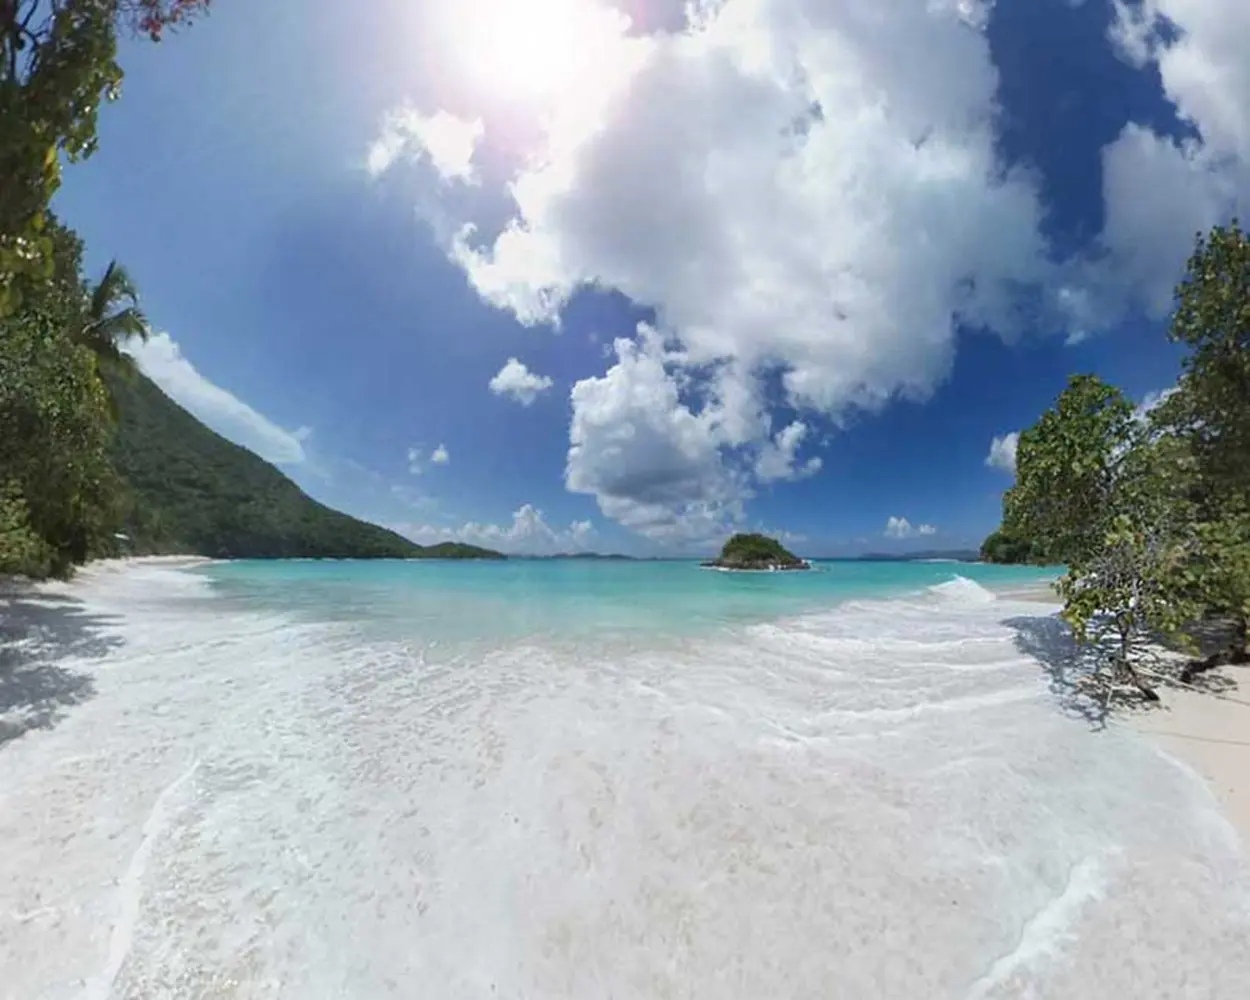 A panoramic view of St John Beaches, showcasing the stunning beauty and serenity of the Caribbean shores.